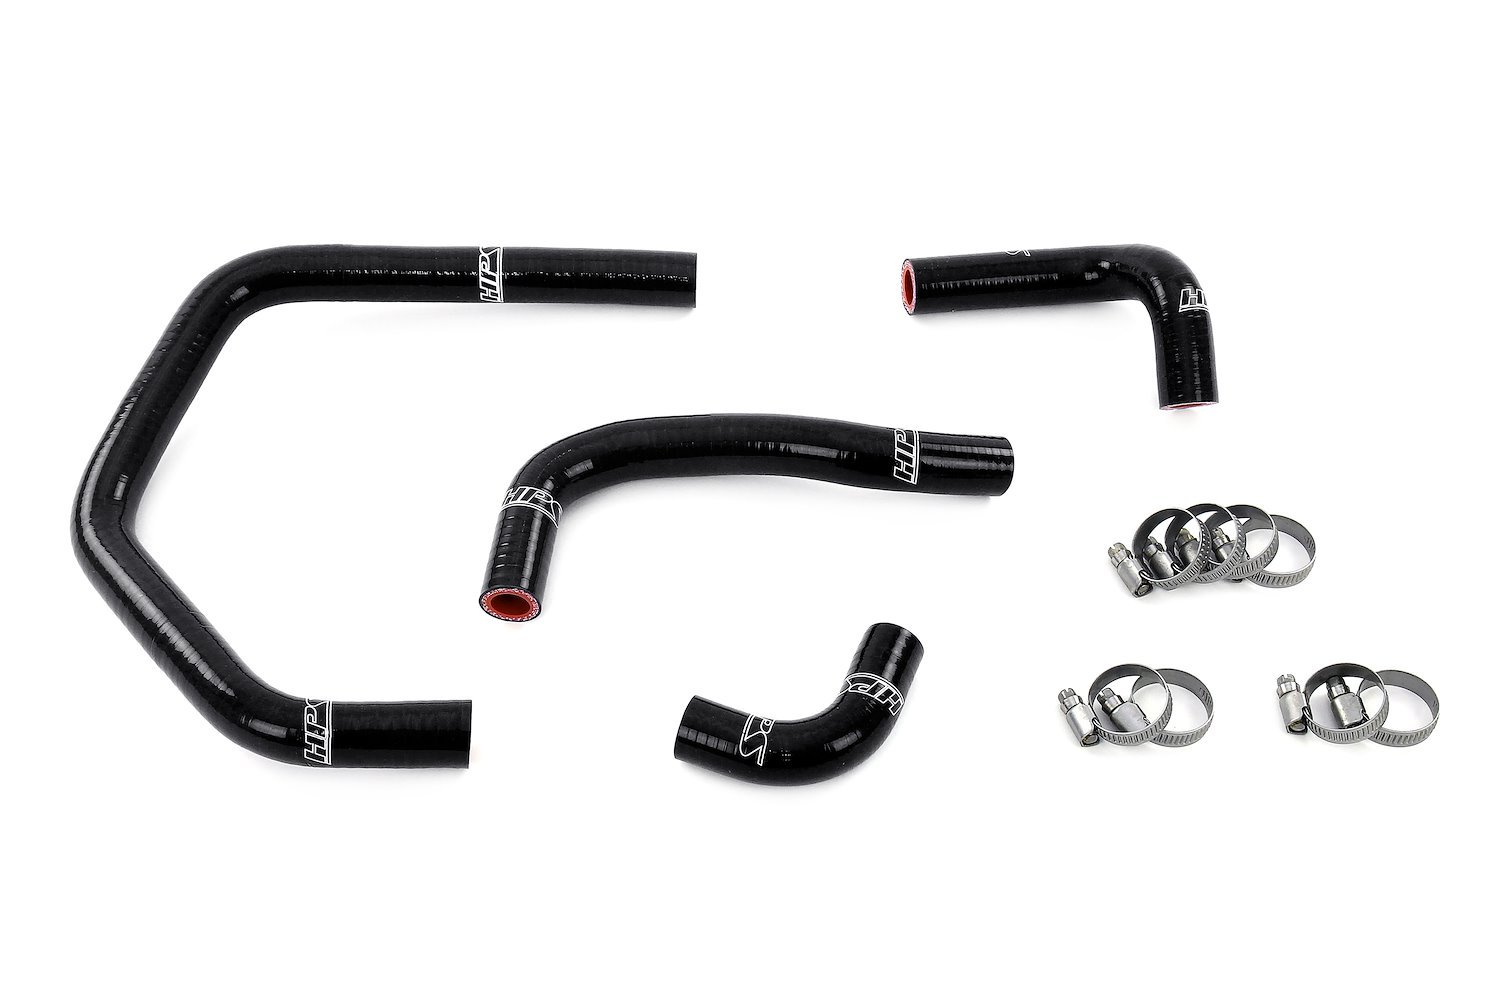 57-2145-BLK Heater Hose Kit, 3-Ply Reinforced Silicone, Replaces Rubber Heater Coolant Hoses